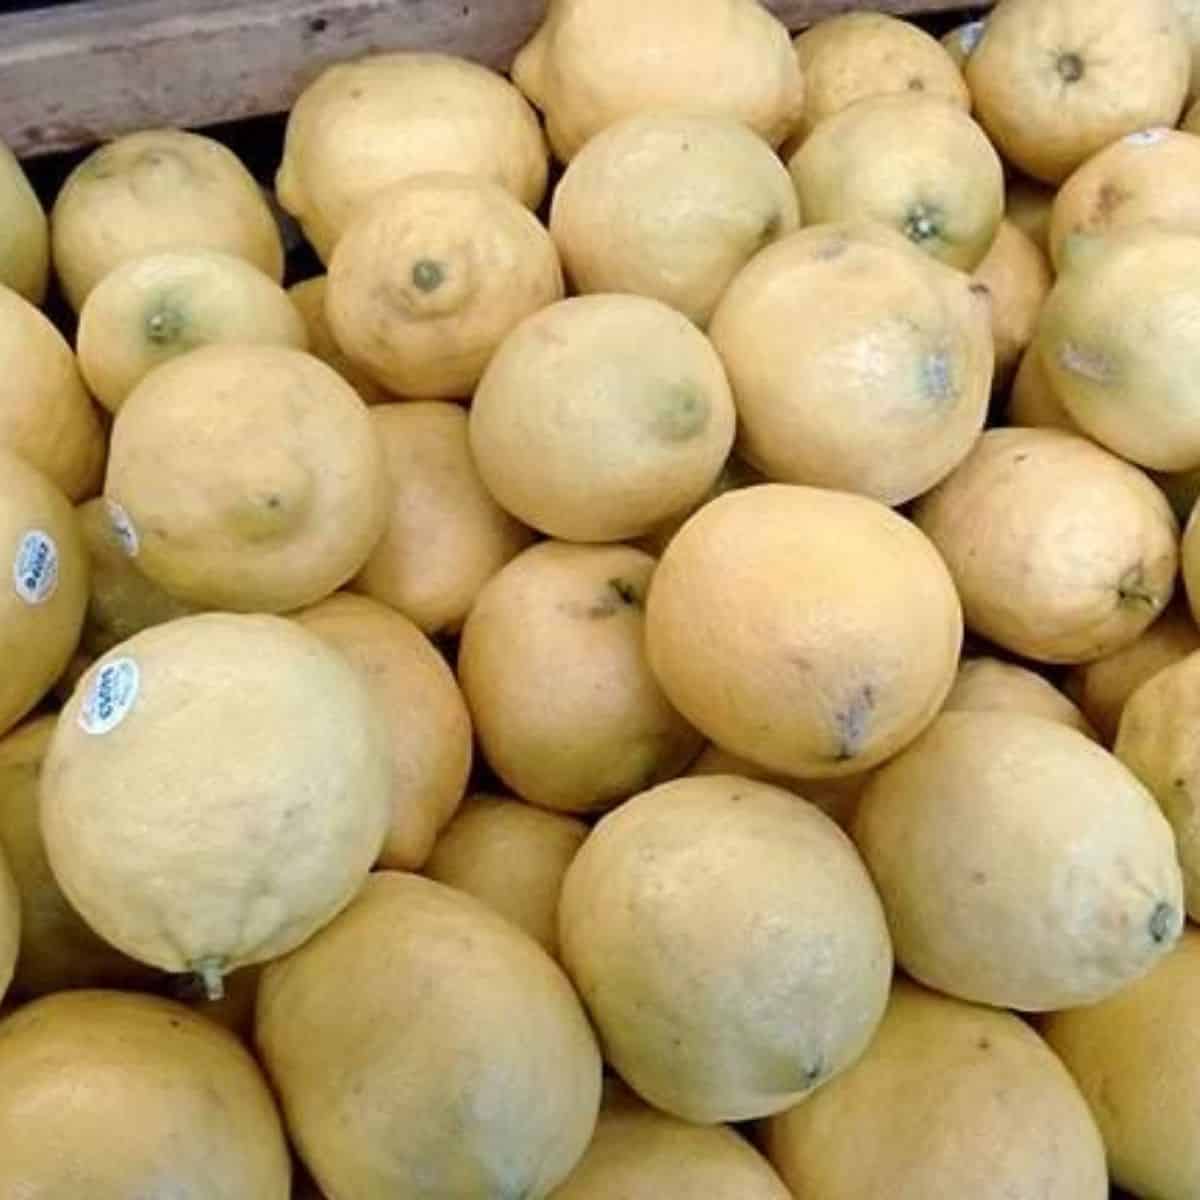 A display of lemons at the grocery store.